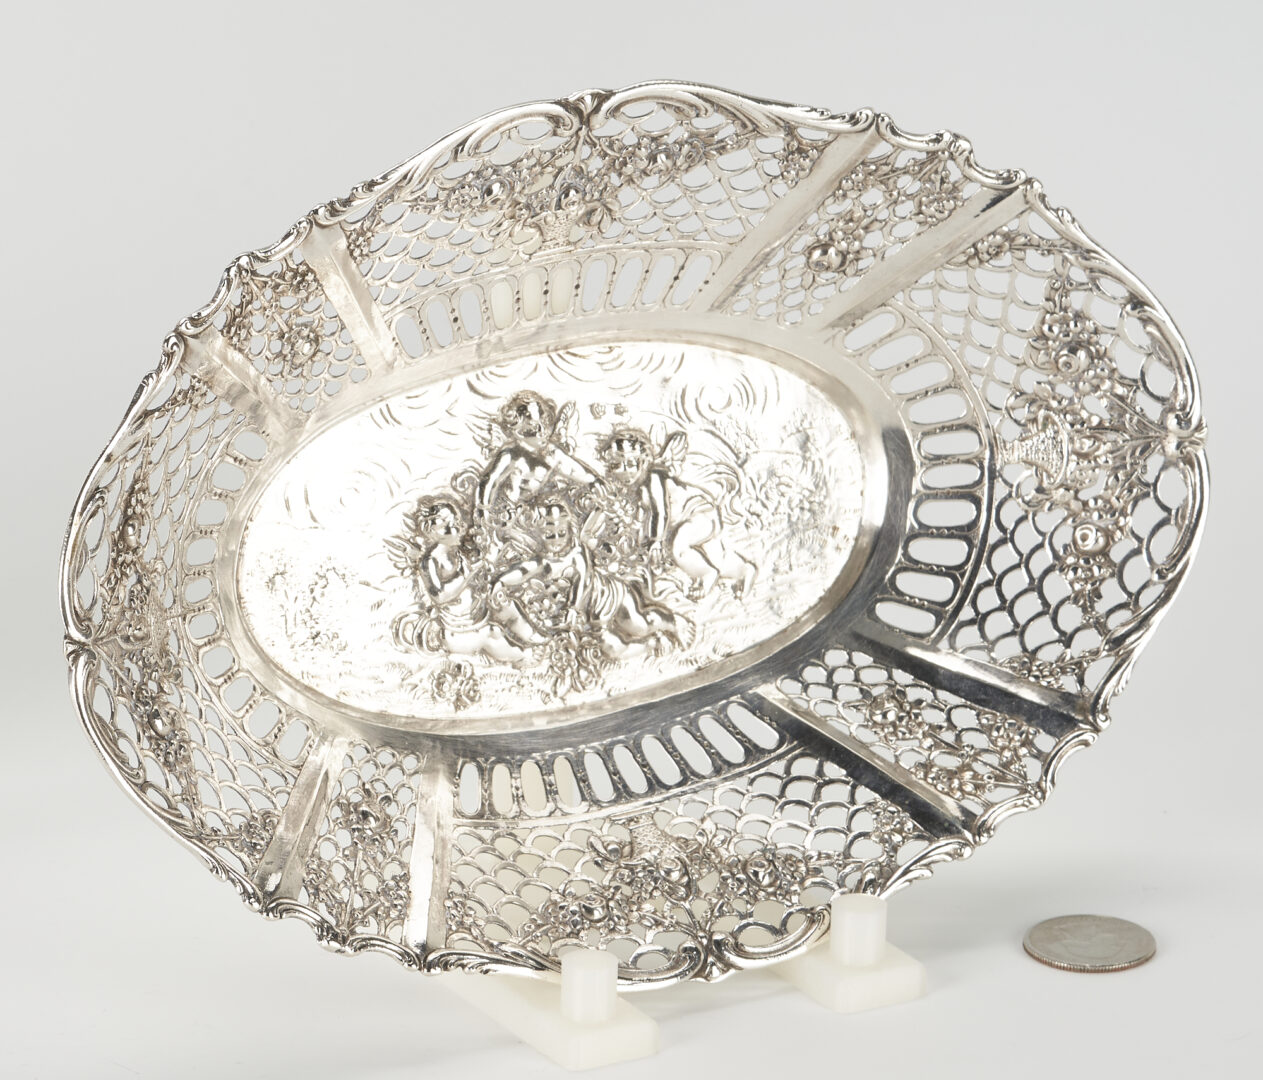 Lot 1108: 2 Silver Oval Trays, Gorham Sterling and Continental